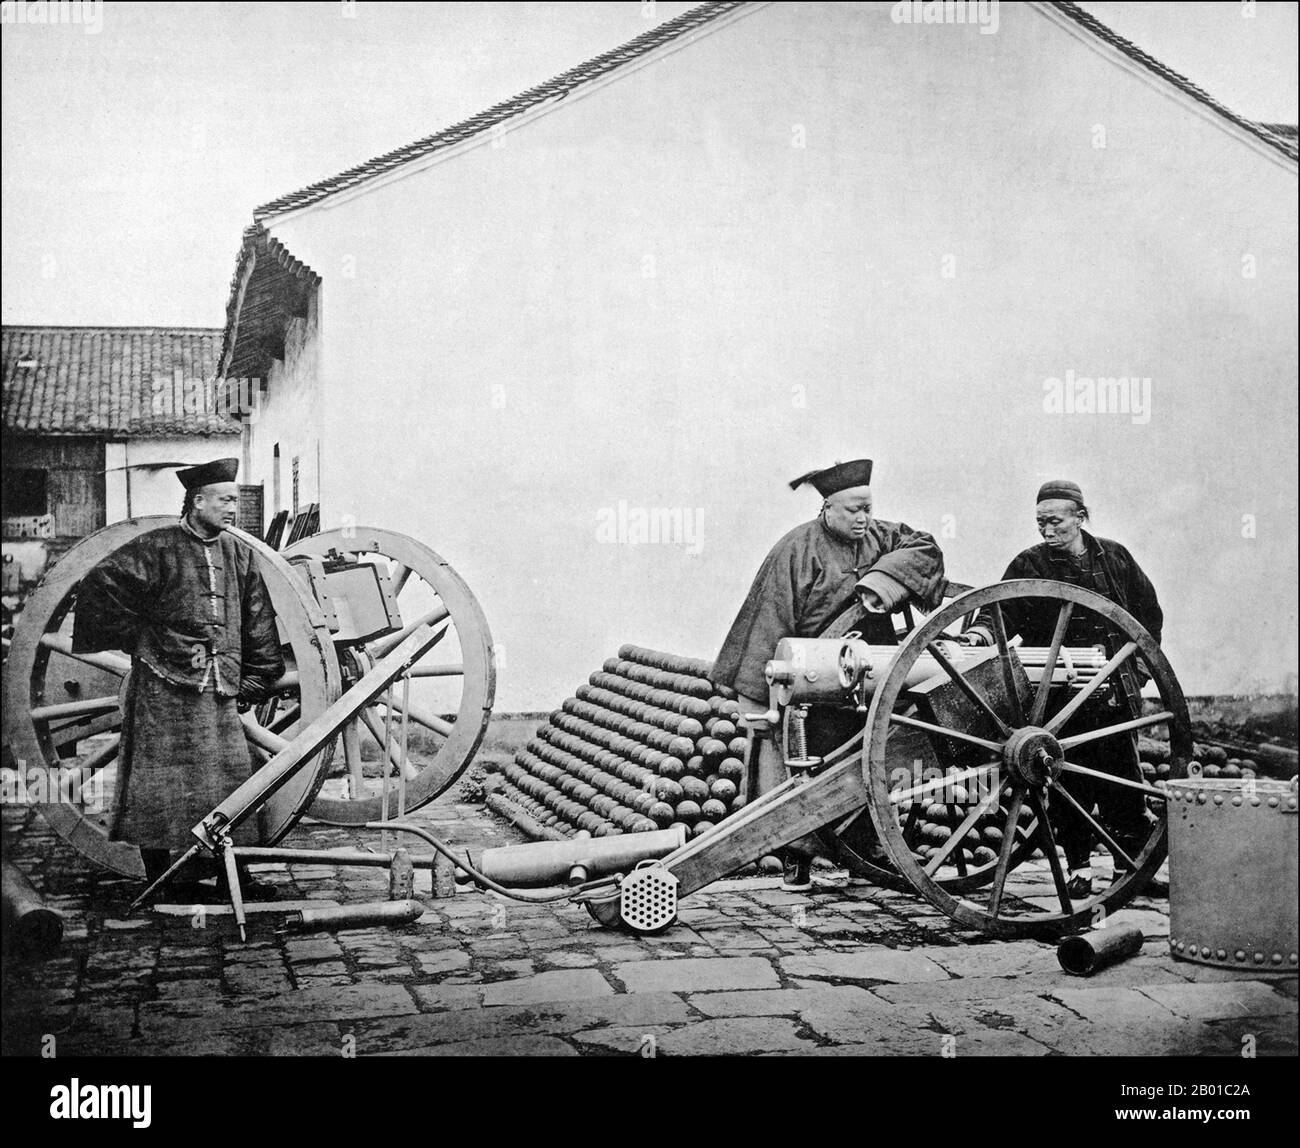 China: Qing officers posing at the Nanjing Jinling Arsenal, built by Li Hongzhang (15 February 1823 - 7 November 1901) in 1865. Photo by John Thomson (1837-1921), 1872.  Li Hongzhang (Wade–Giles: Li Hung-chang), Marquis Suyi of the First Class, was a Chinese civilian official who ended several major rebellions, and a leading statesman of the late Qing Empire. He served in important positions of the Imperial Court, once holding the office of the Viceroy of Zhili.   His image in China remains largely controversial. Stock Photo